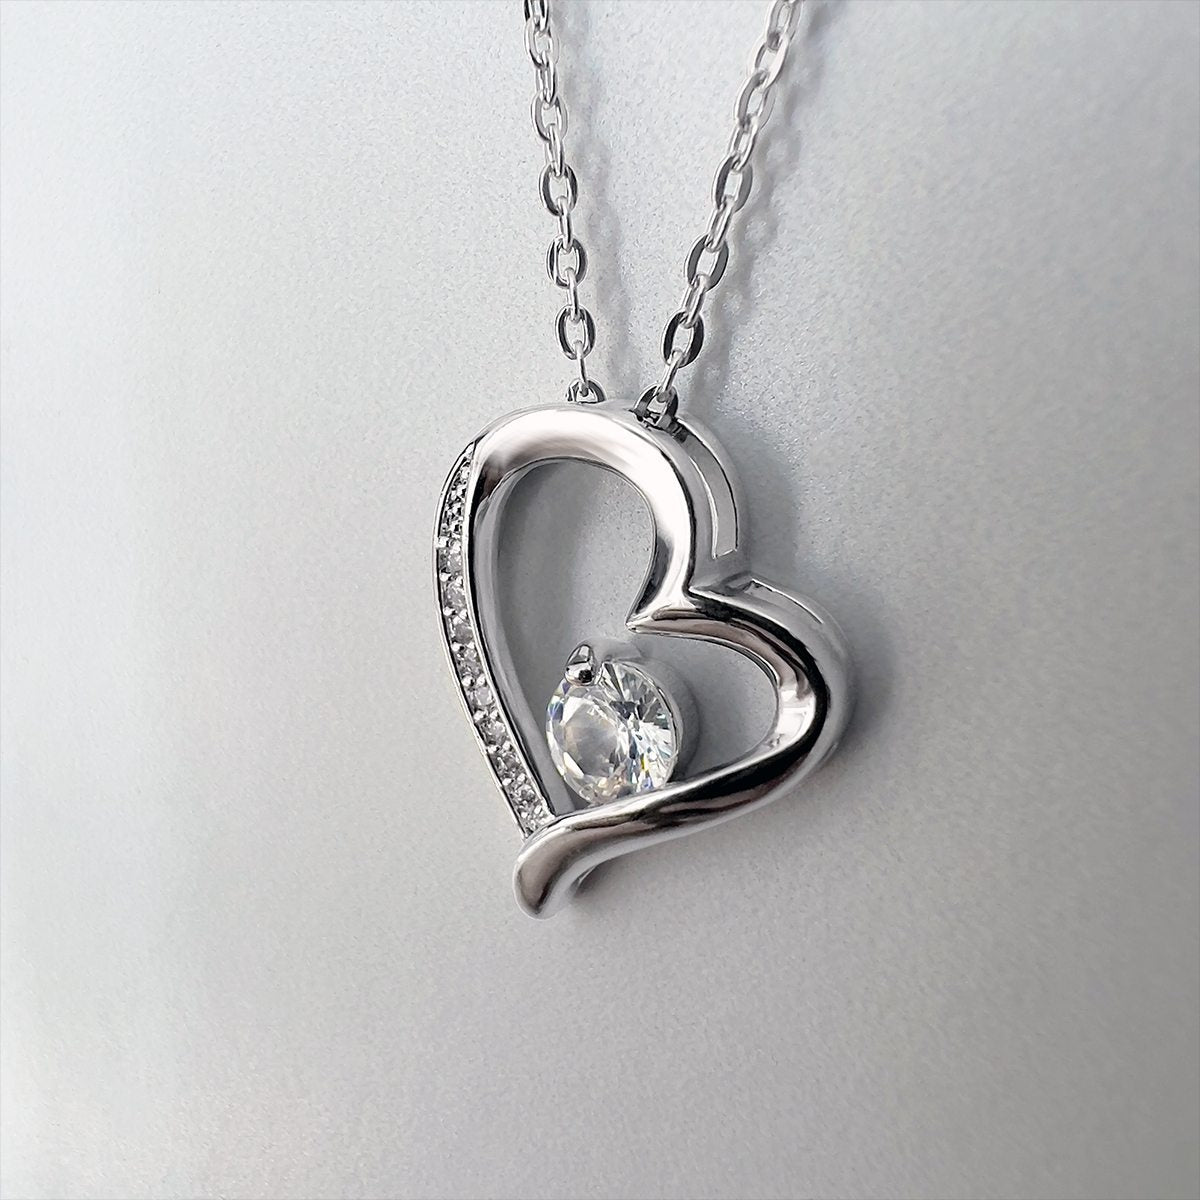 To My Gorgeous Wife, When I Say "I Love You More" - Silver Heart Necklace Gift Set